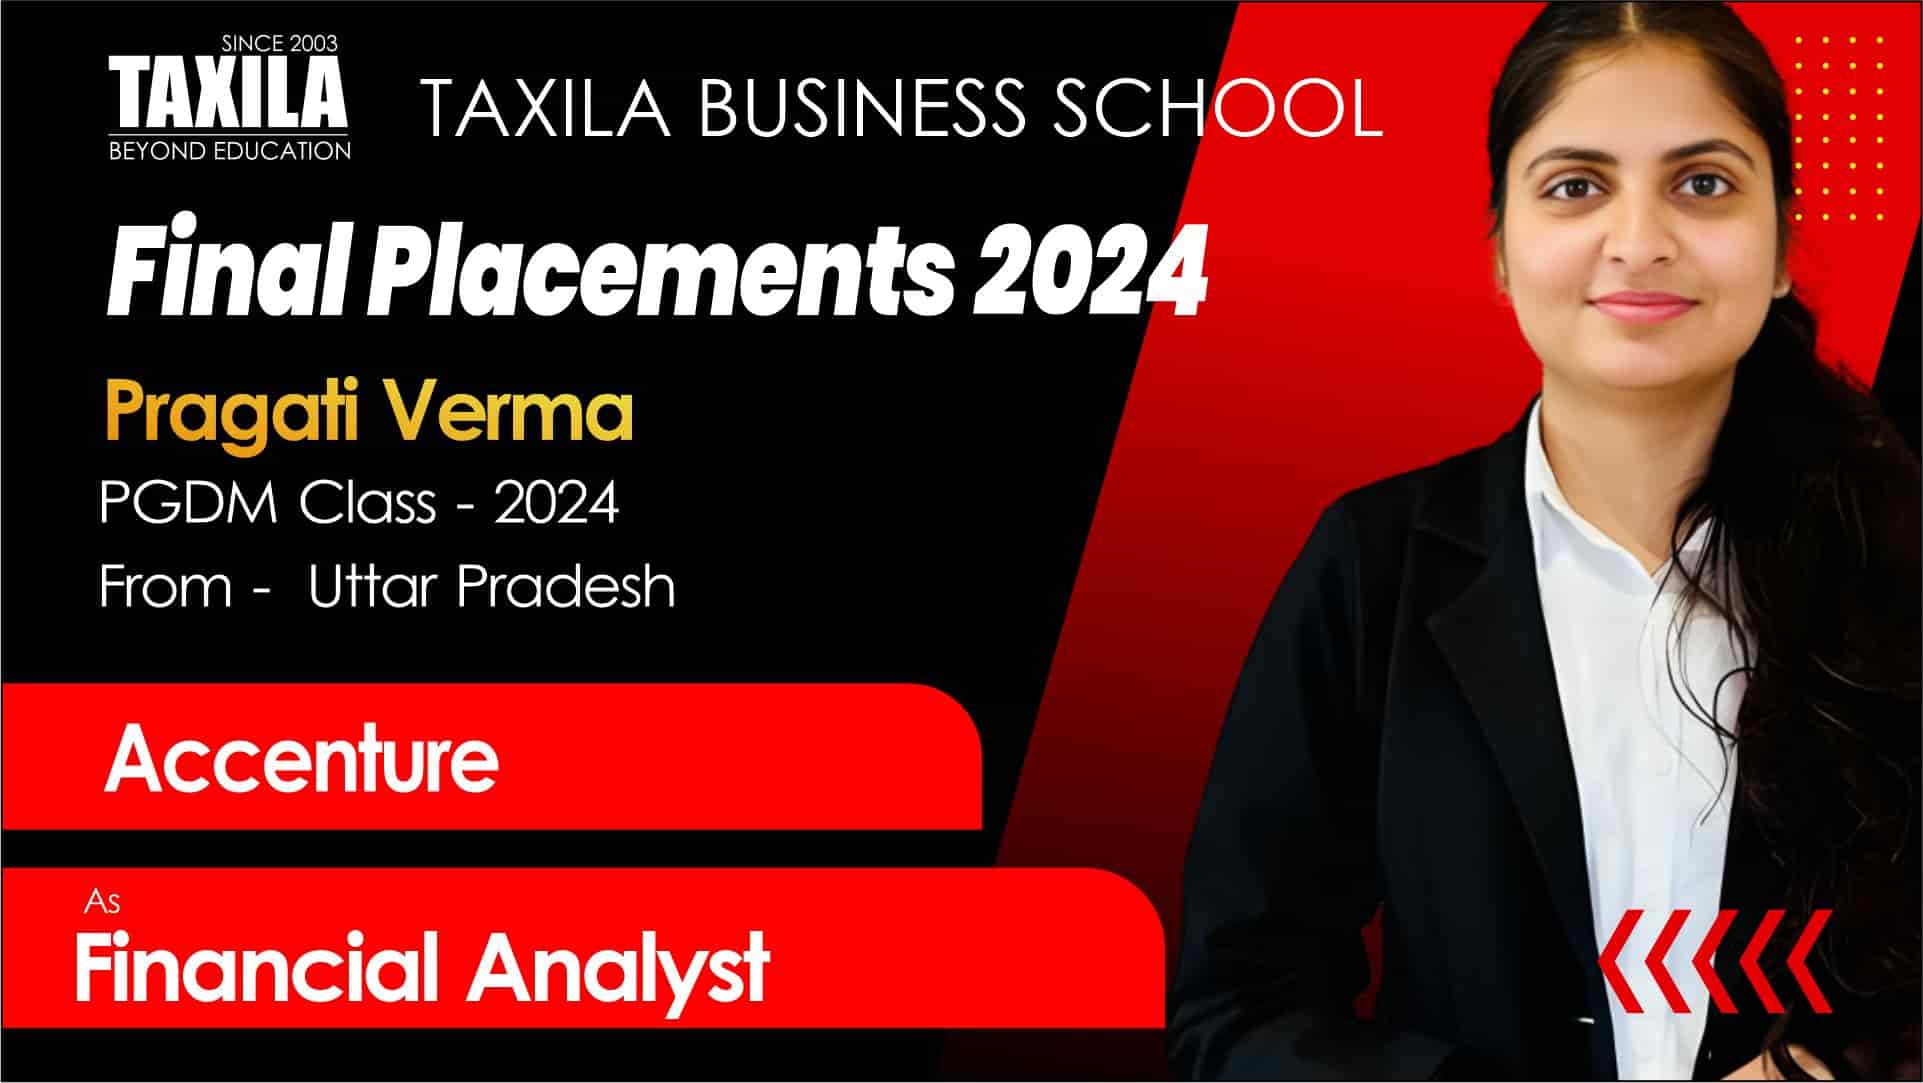 Pragati Verma Placed at Accenture | Student (2022-2024) at Taxila Business School
